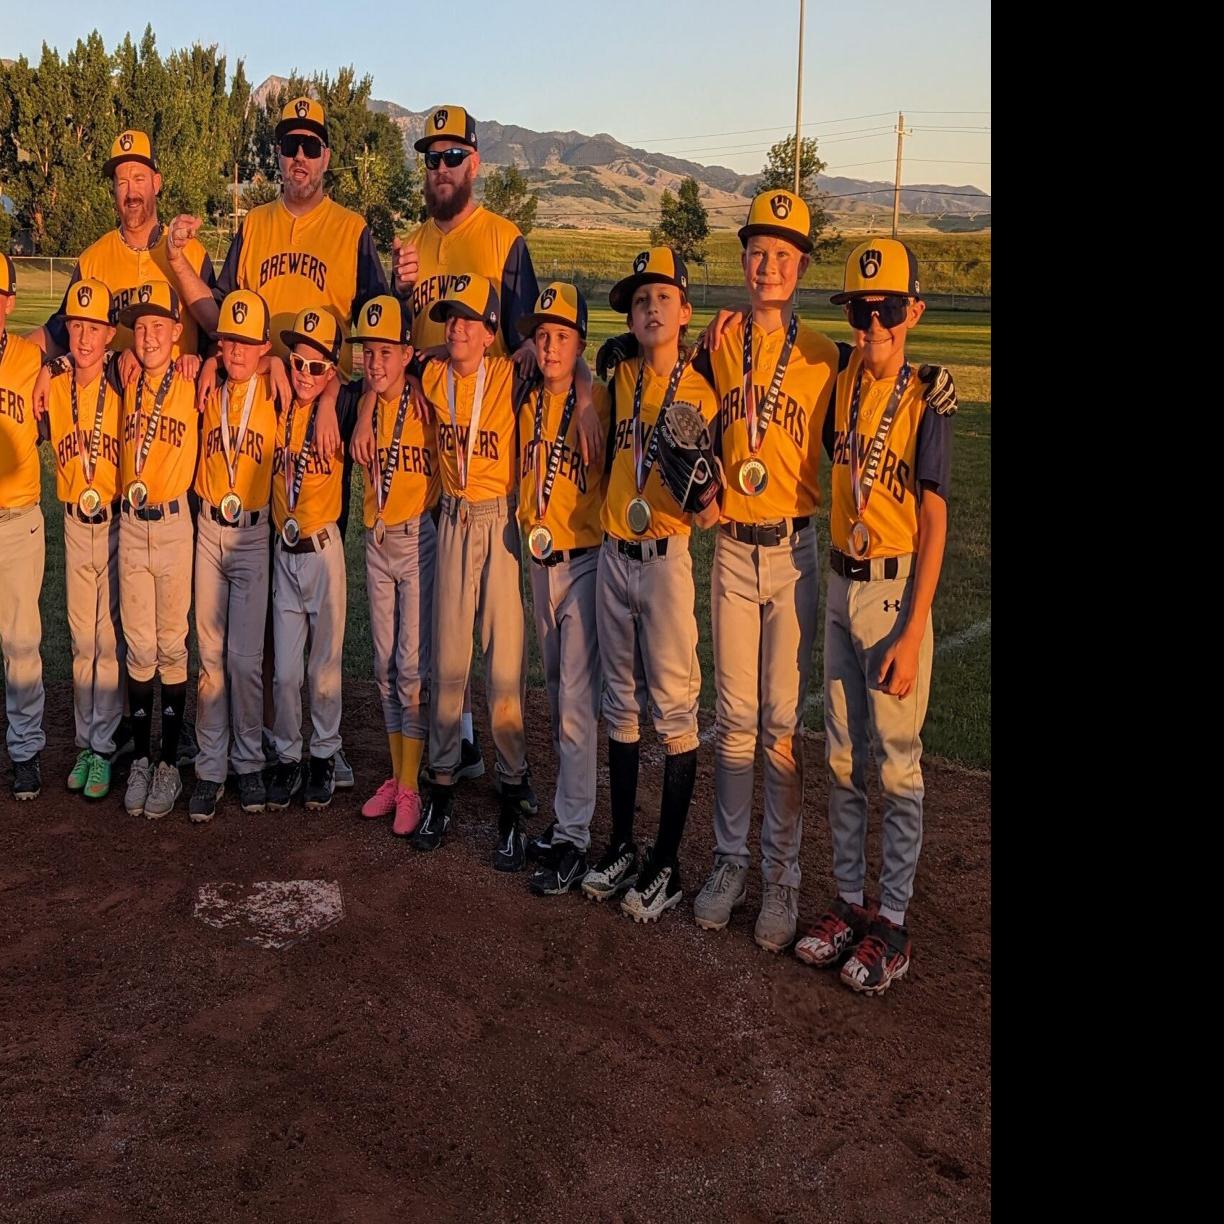 Youth baseball: Brewers rally past Rockies to win local tourney